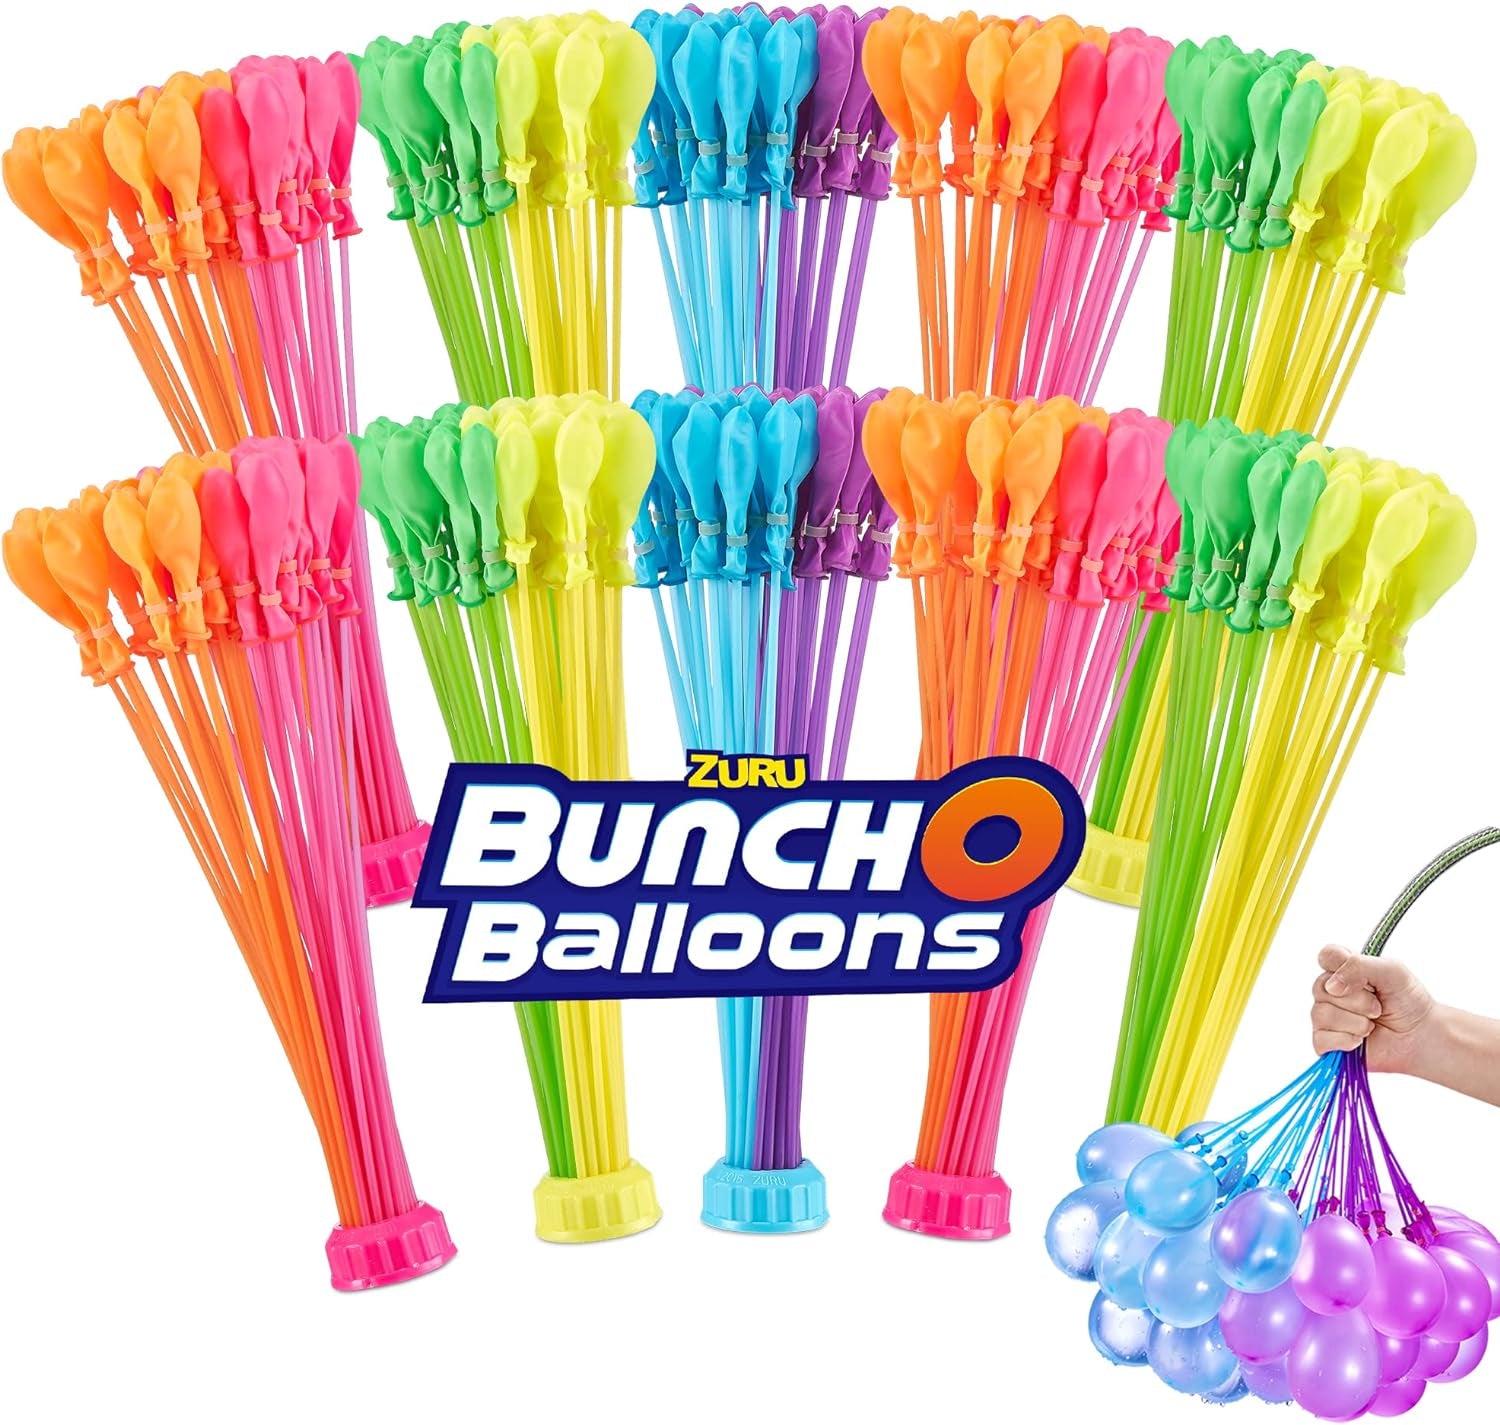 Multi-Colored (10 Bunches) by , 350+ Rapid-Filling Self-Sealing Instant Water Balloons for Outdoor Family, Children Summer Fun - Total (100 Balloons) Colors May Vary